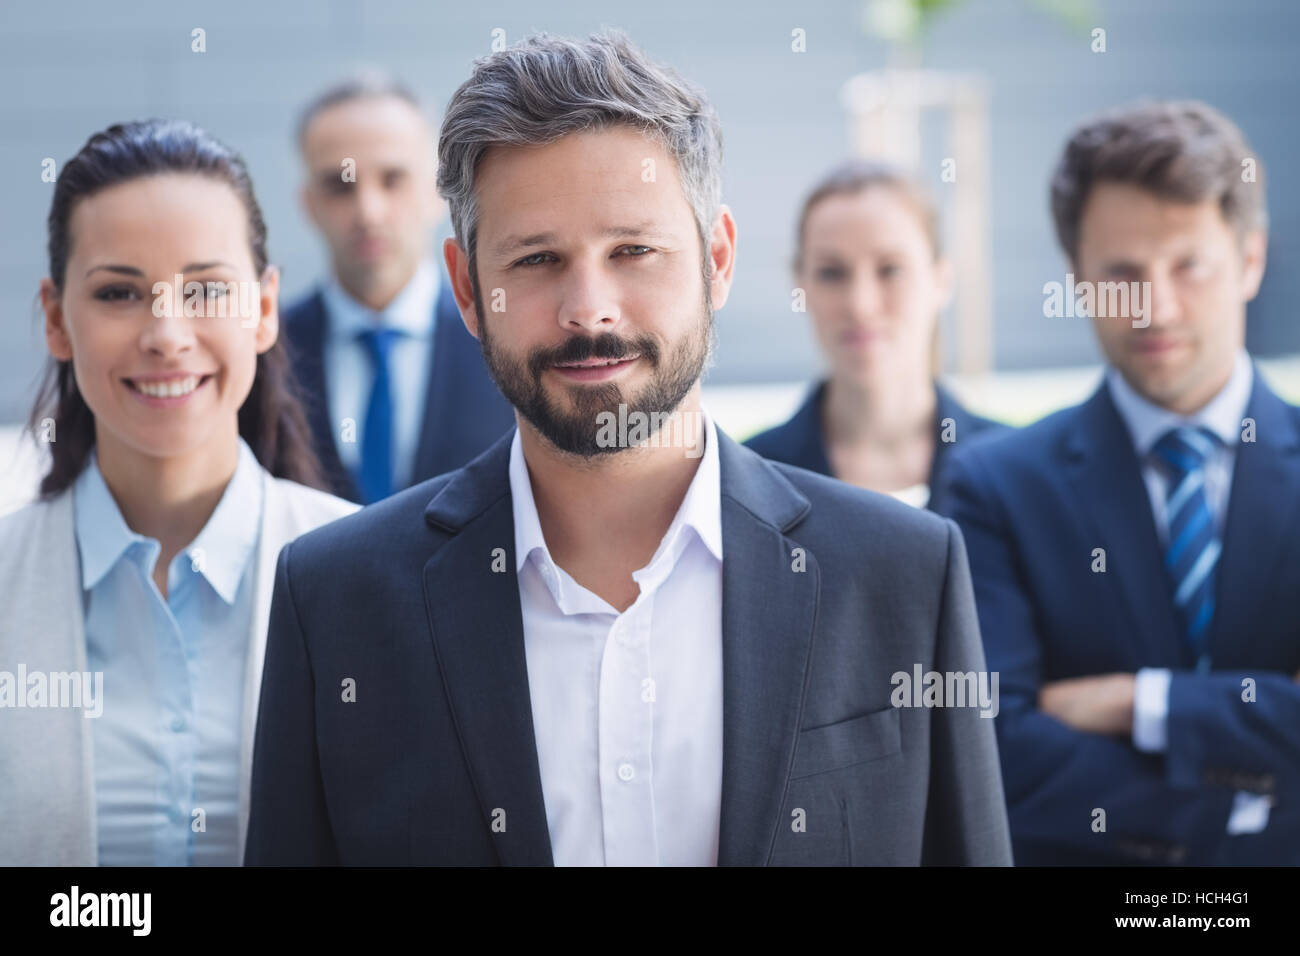 Confident businessman with colleagues Stock Photo